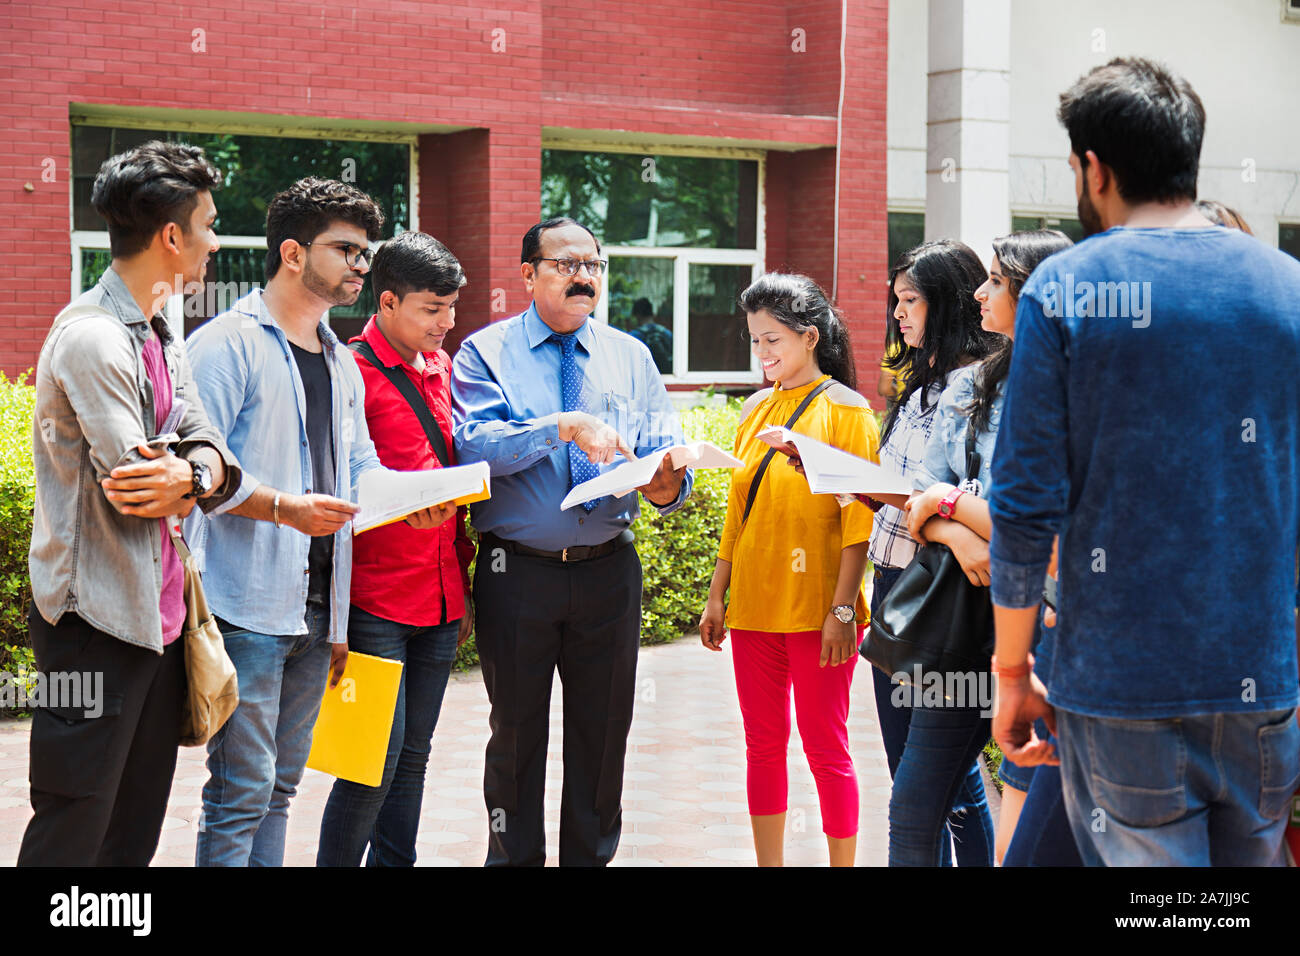 Group Of College Students With Professor Studying Book Education Discussion In-Outside Campus Stock Photo